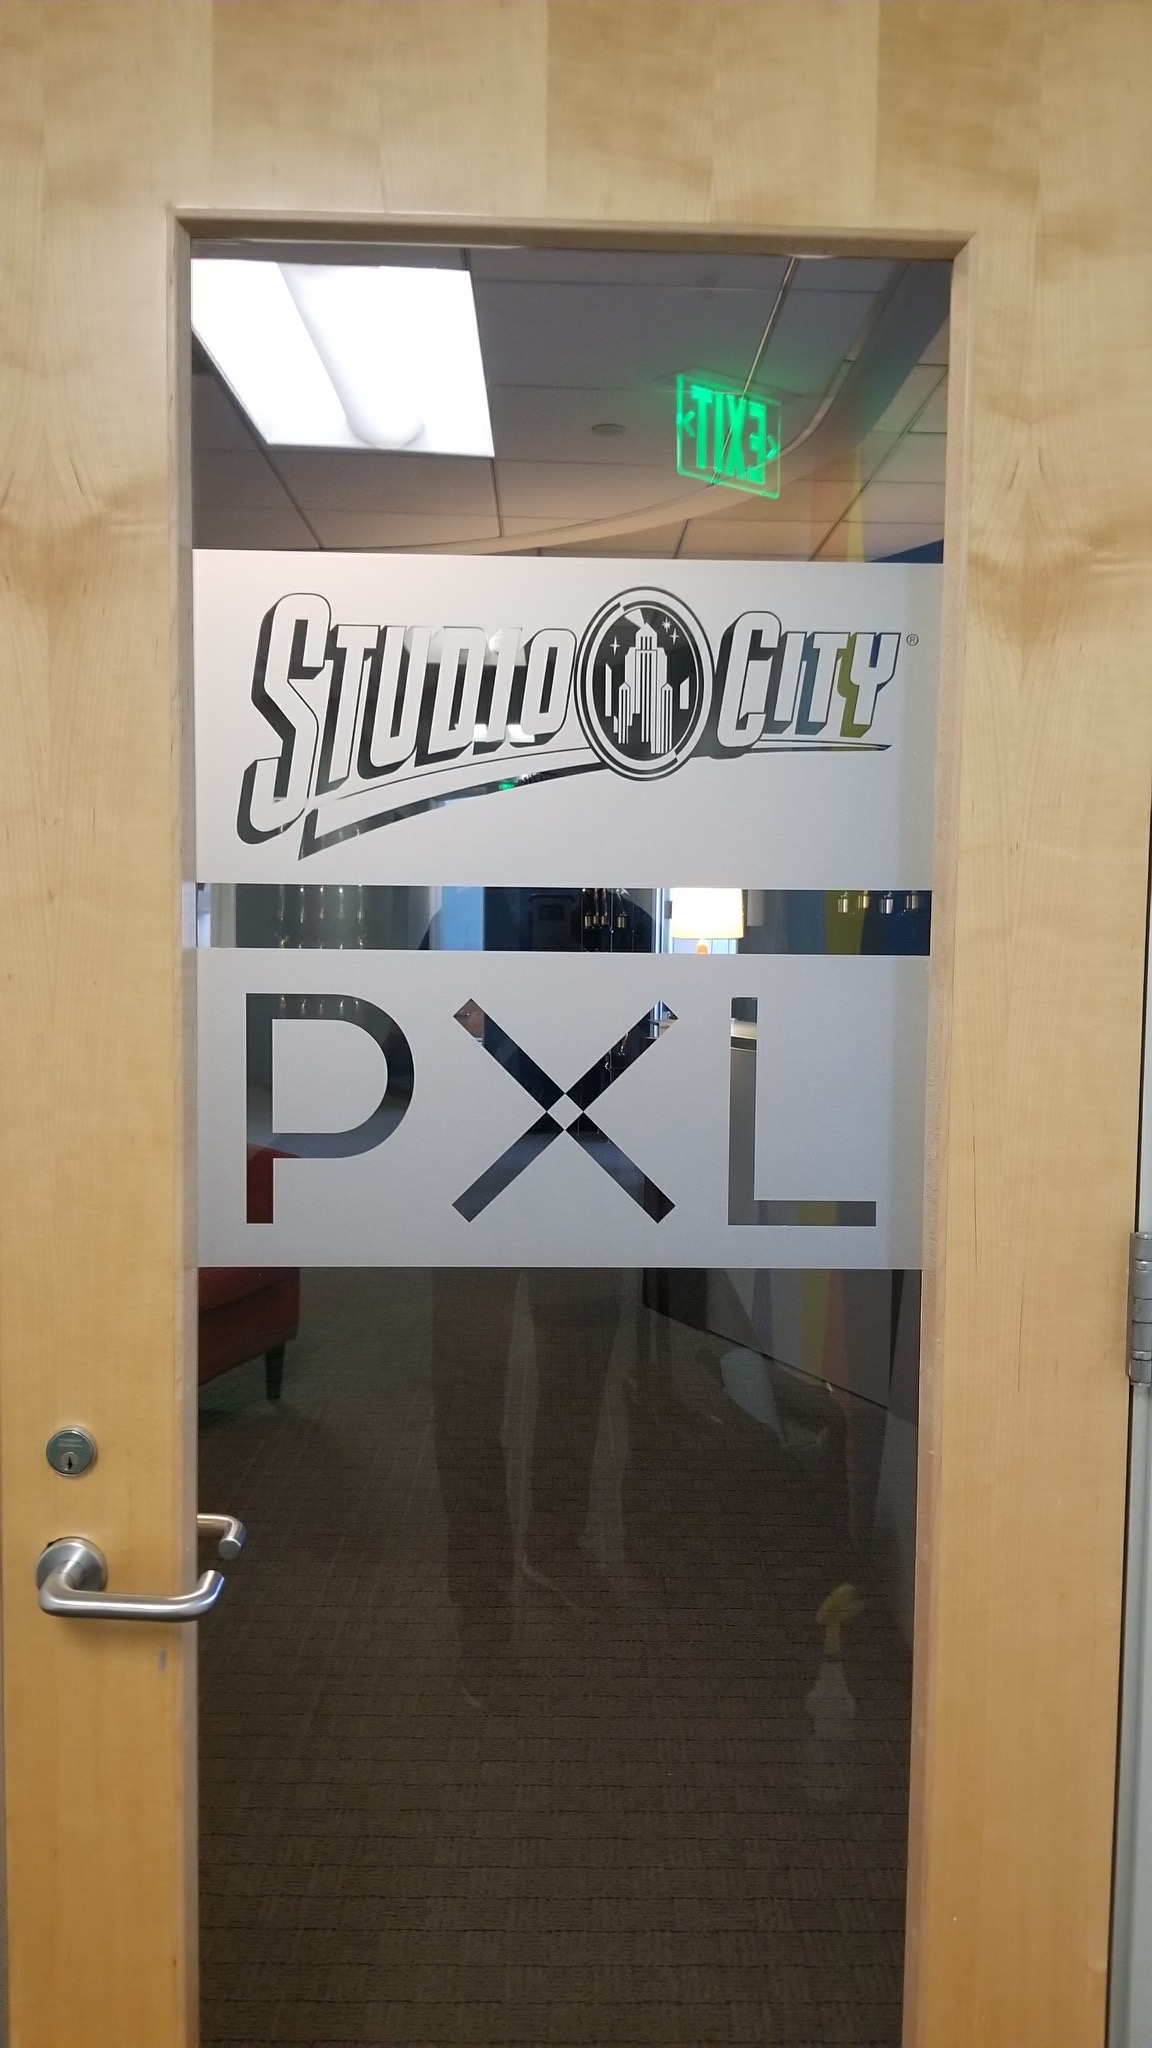 You are currently viewing Office Door Etched Glass Vinyl for Studio City in Los Angeles